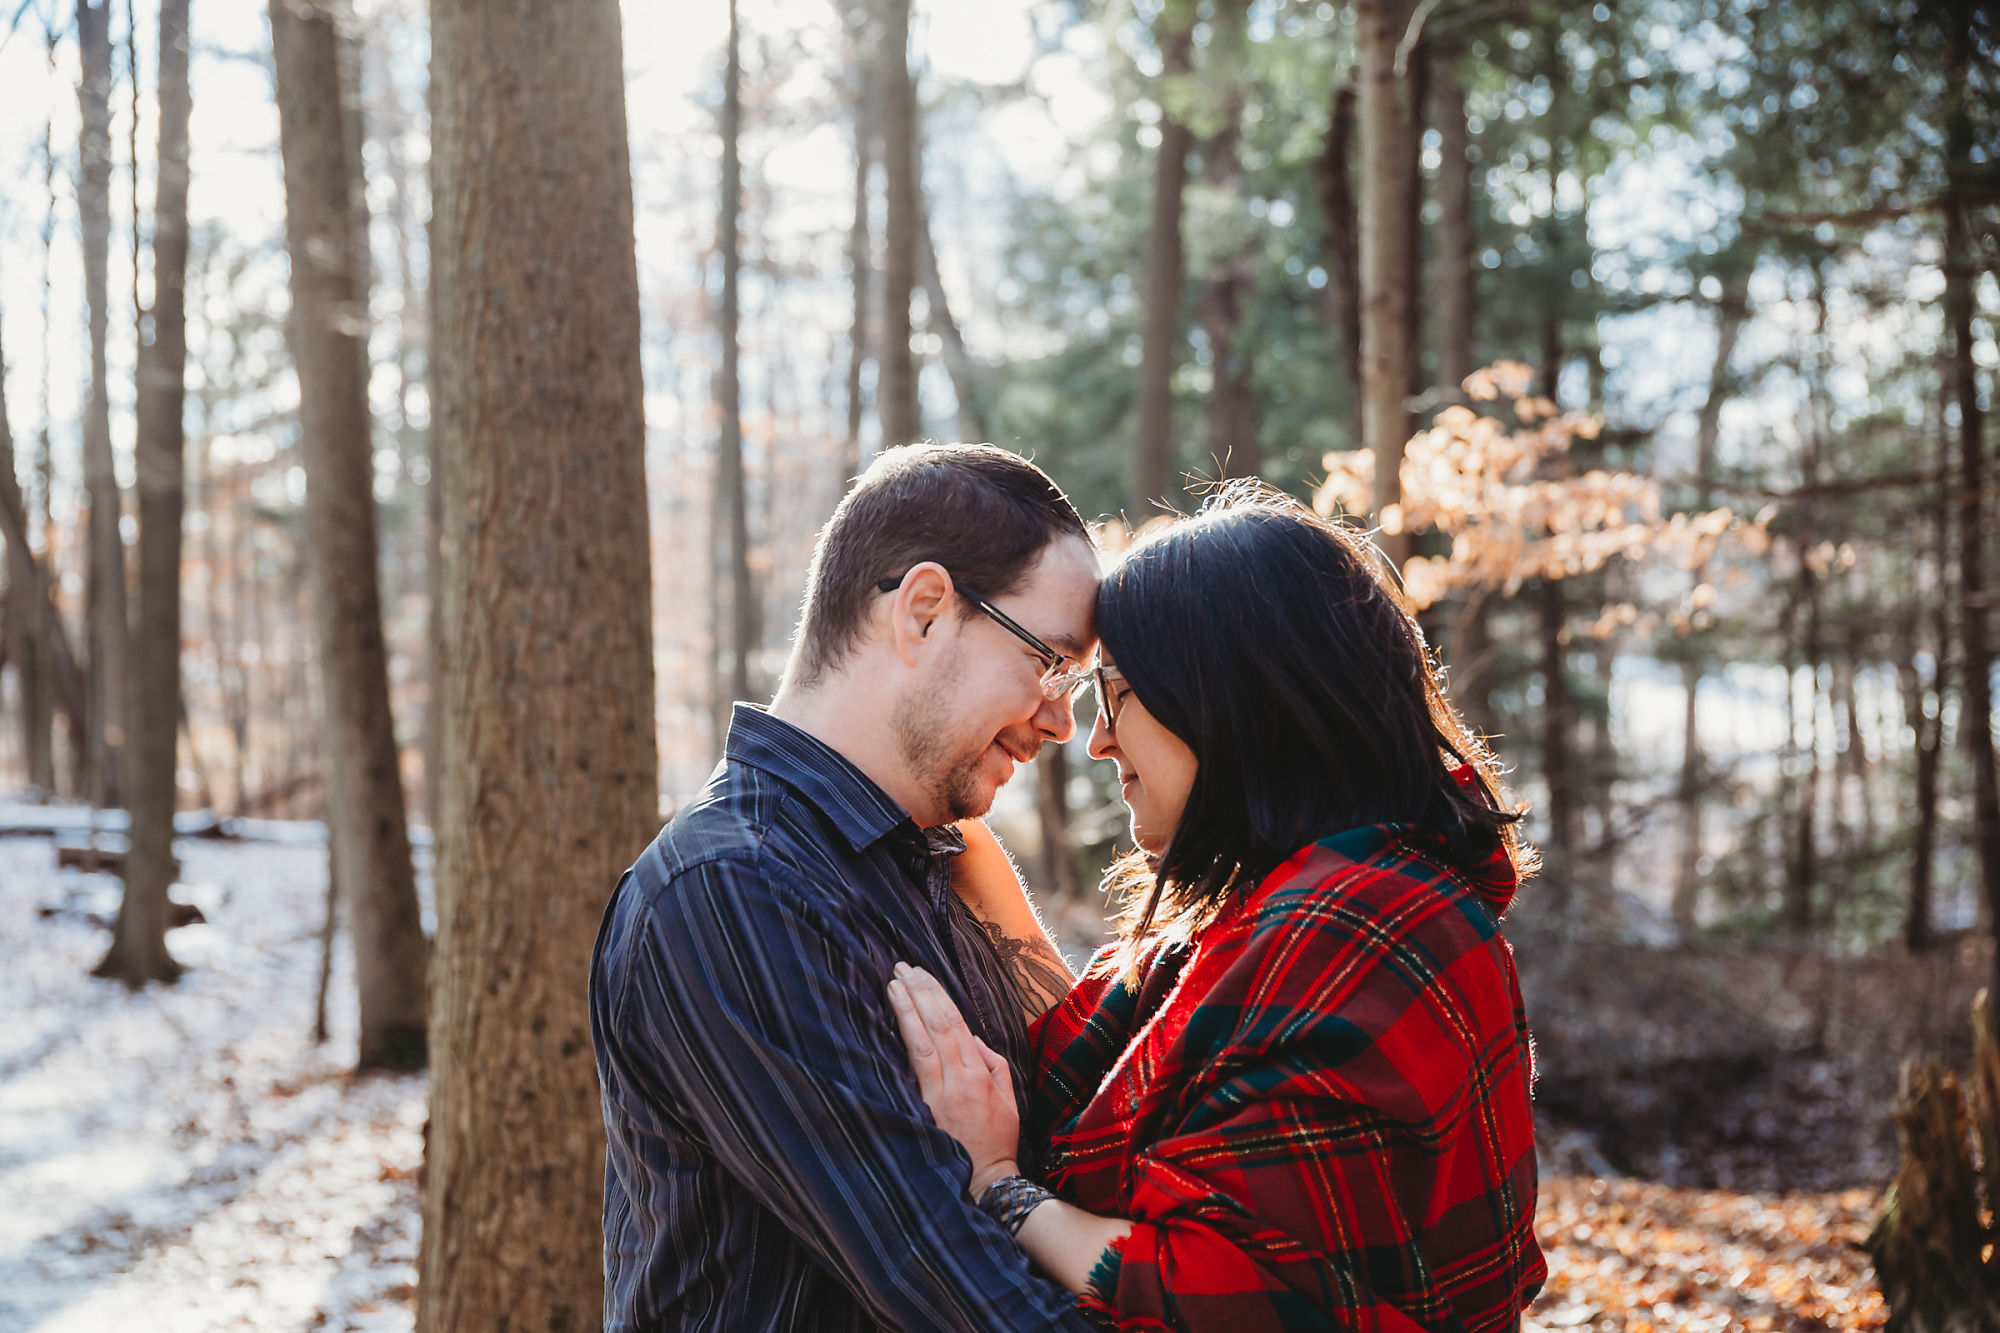 Andy & Erin embrace in the forest of Dundas Conservation Area in the winter during their maternity photoshoot with Dundas Maternity Photographer Jennifer Blaak.